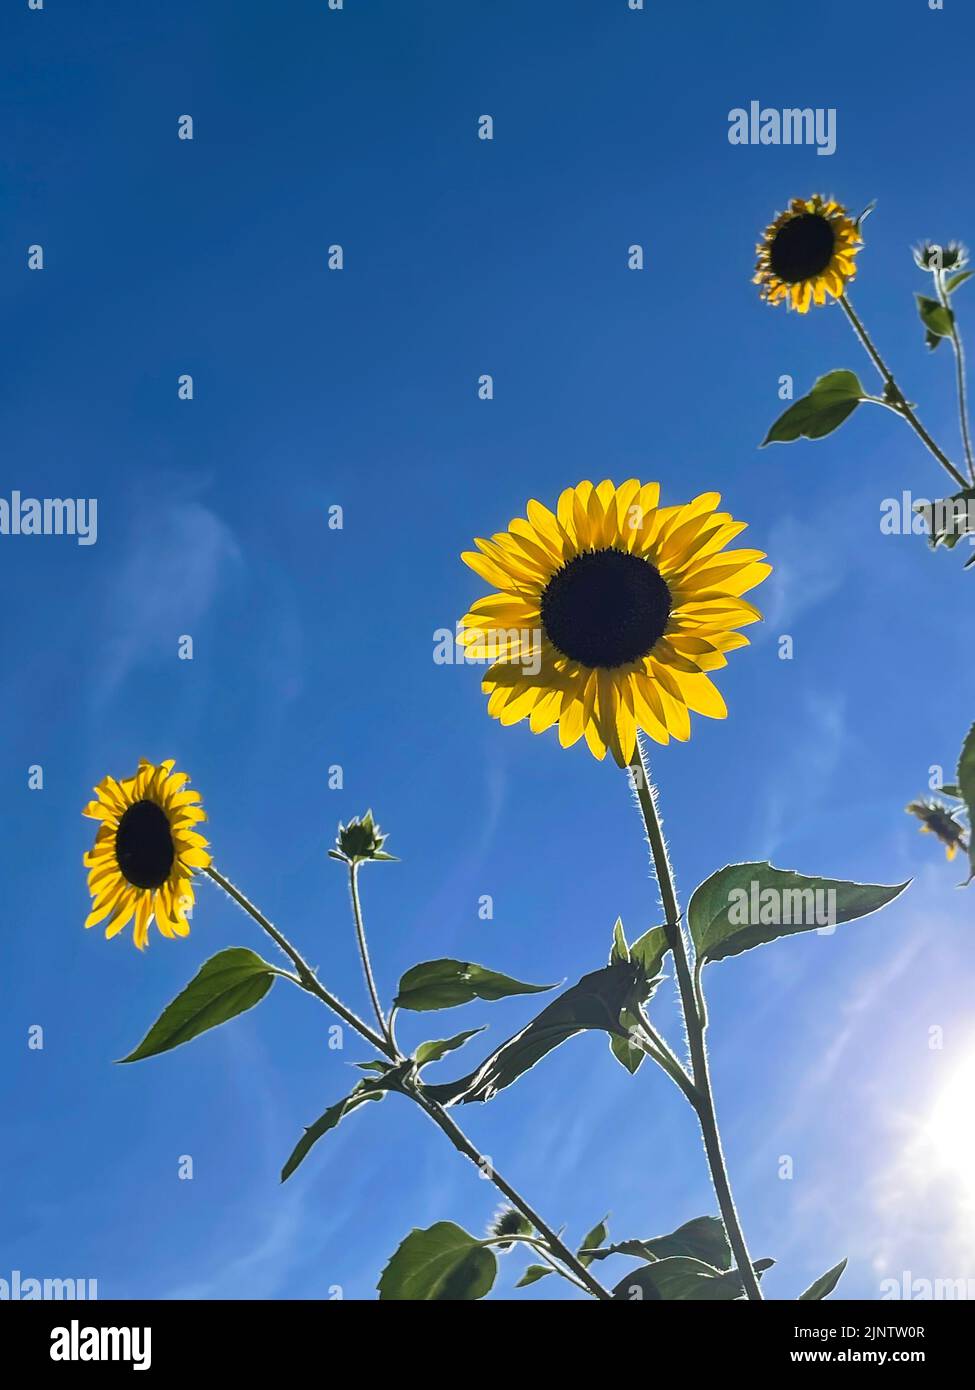 A collection of bright yellow petaled sunflowers loom overhead, backlit by the low afternoon sun against a brilliant blue summer sky. Stock Photo